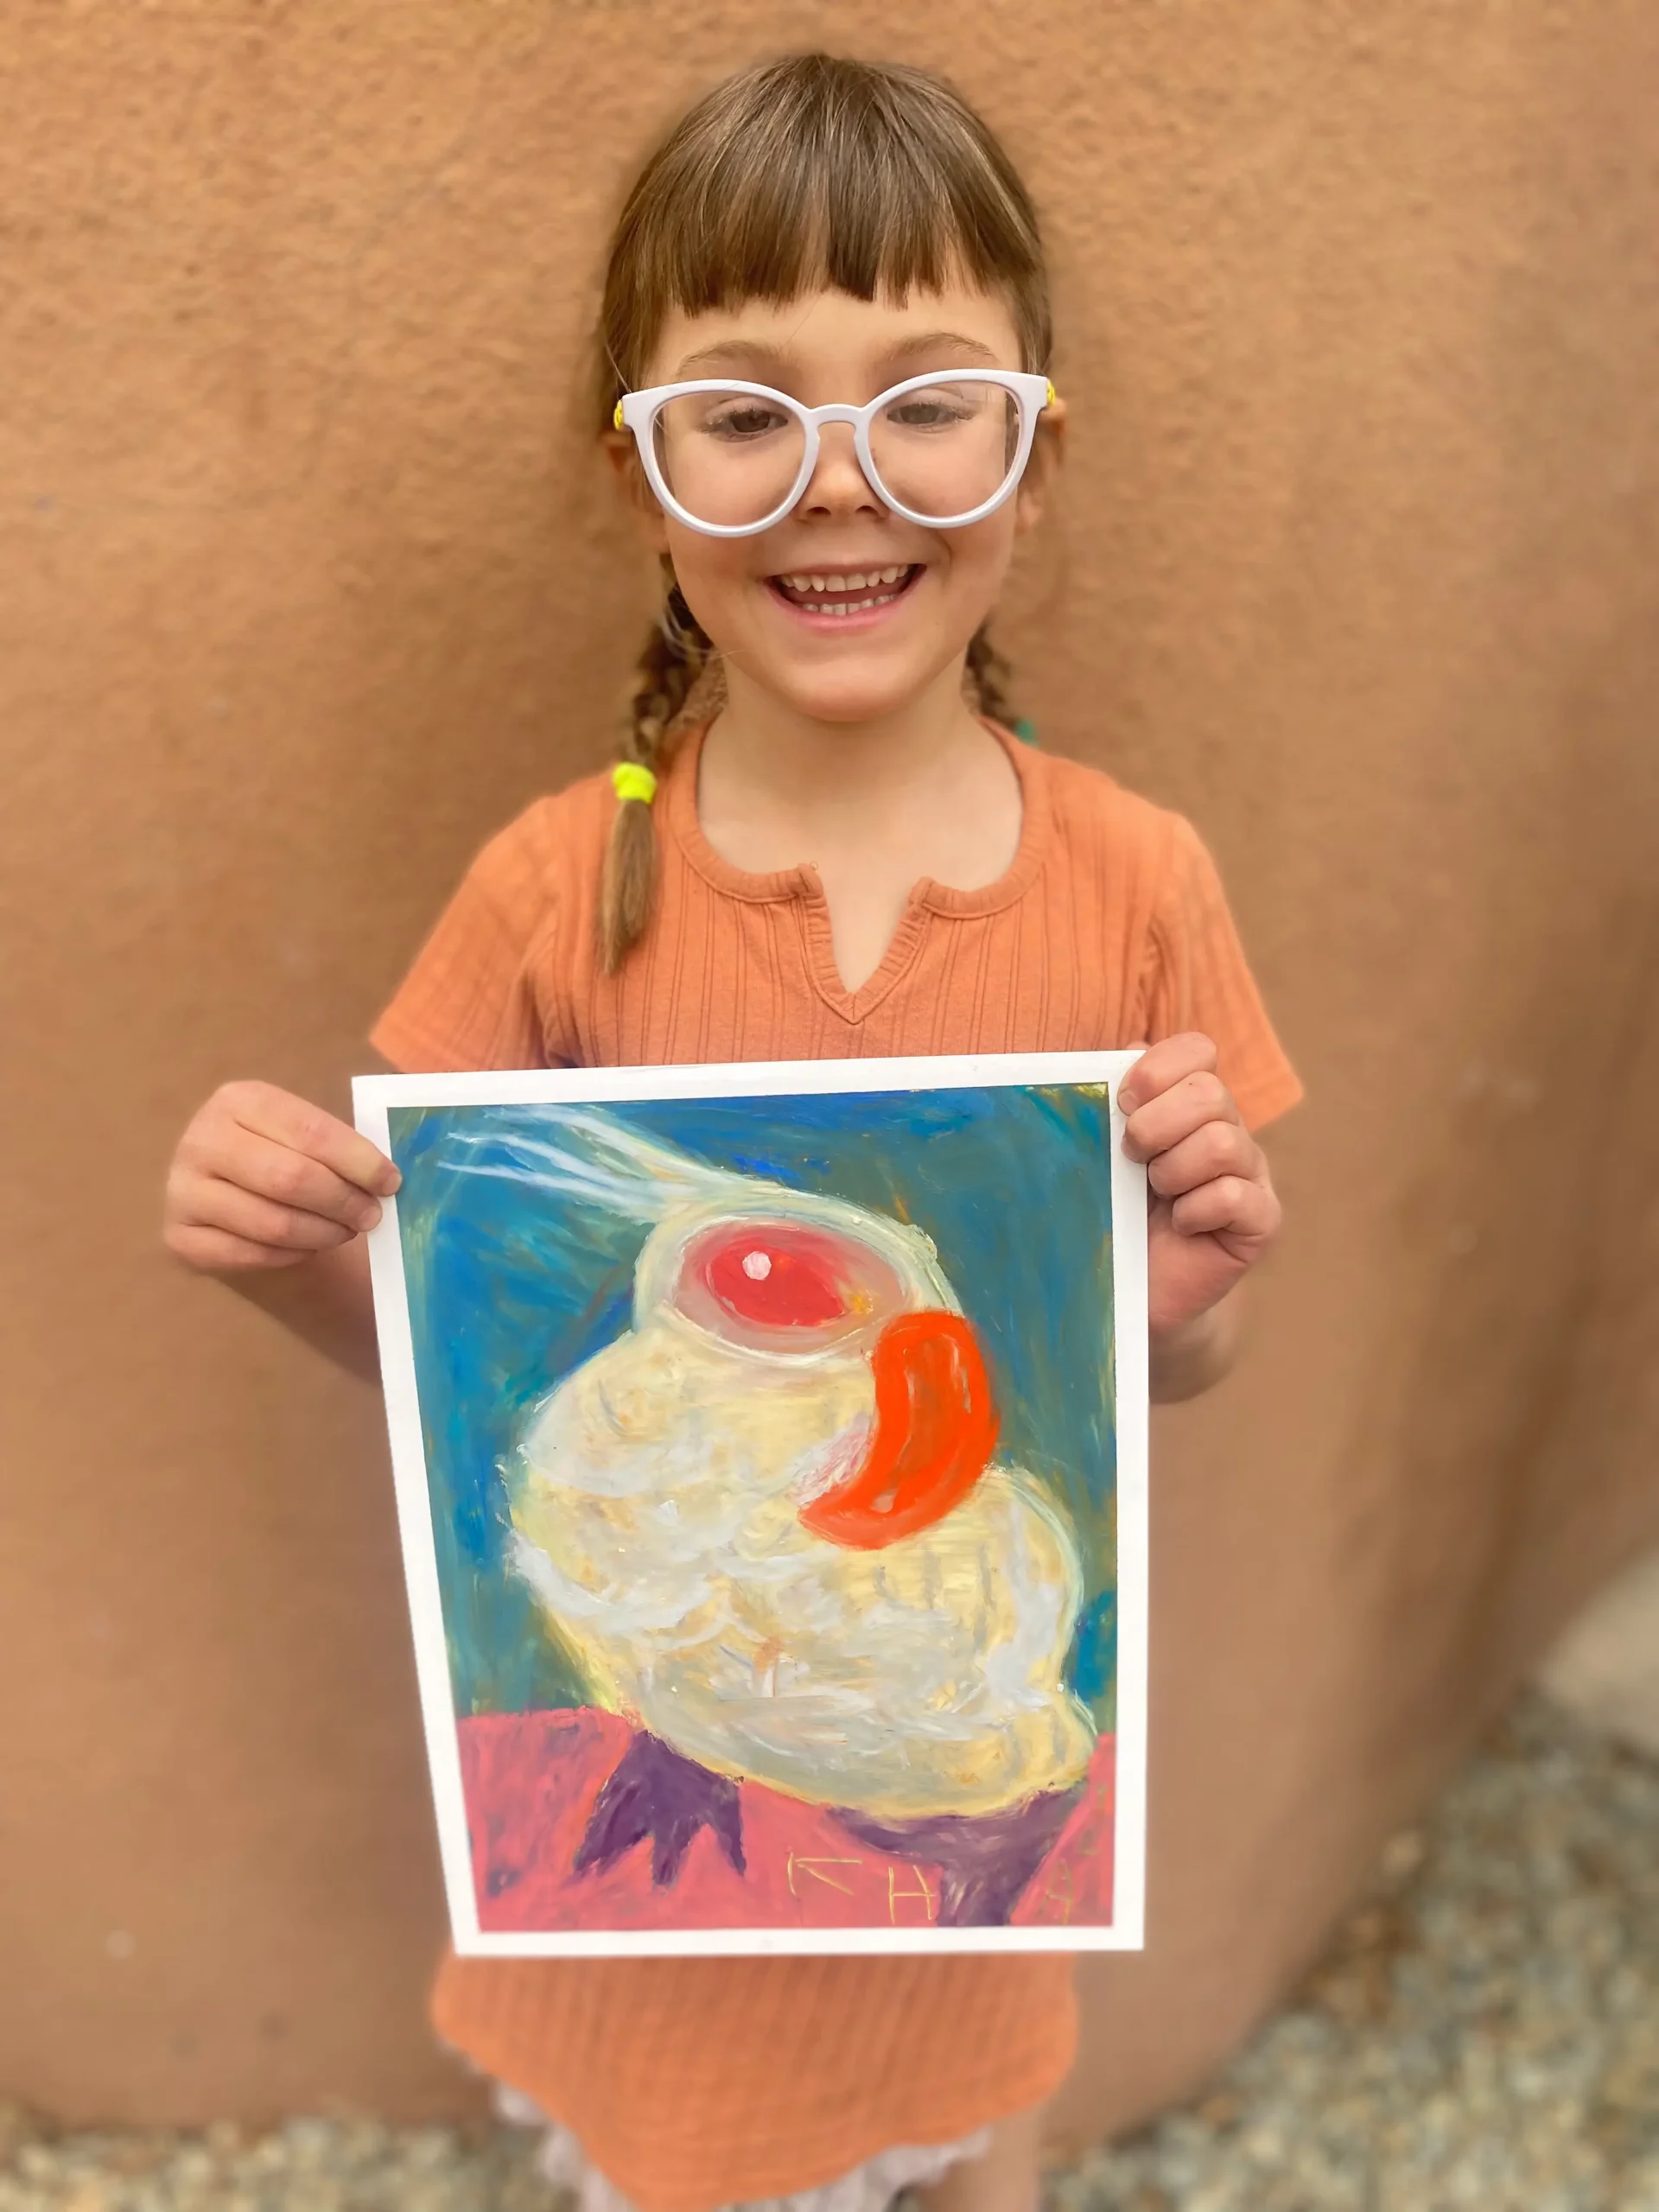 young girl artist holding picture of bird in cool style